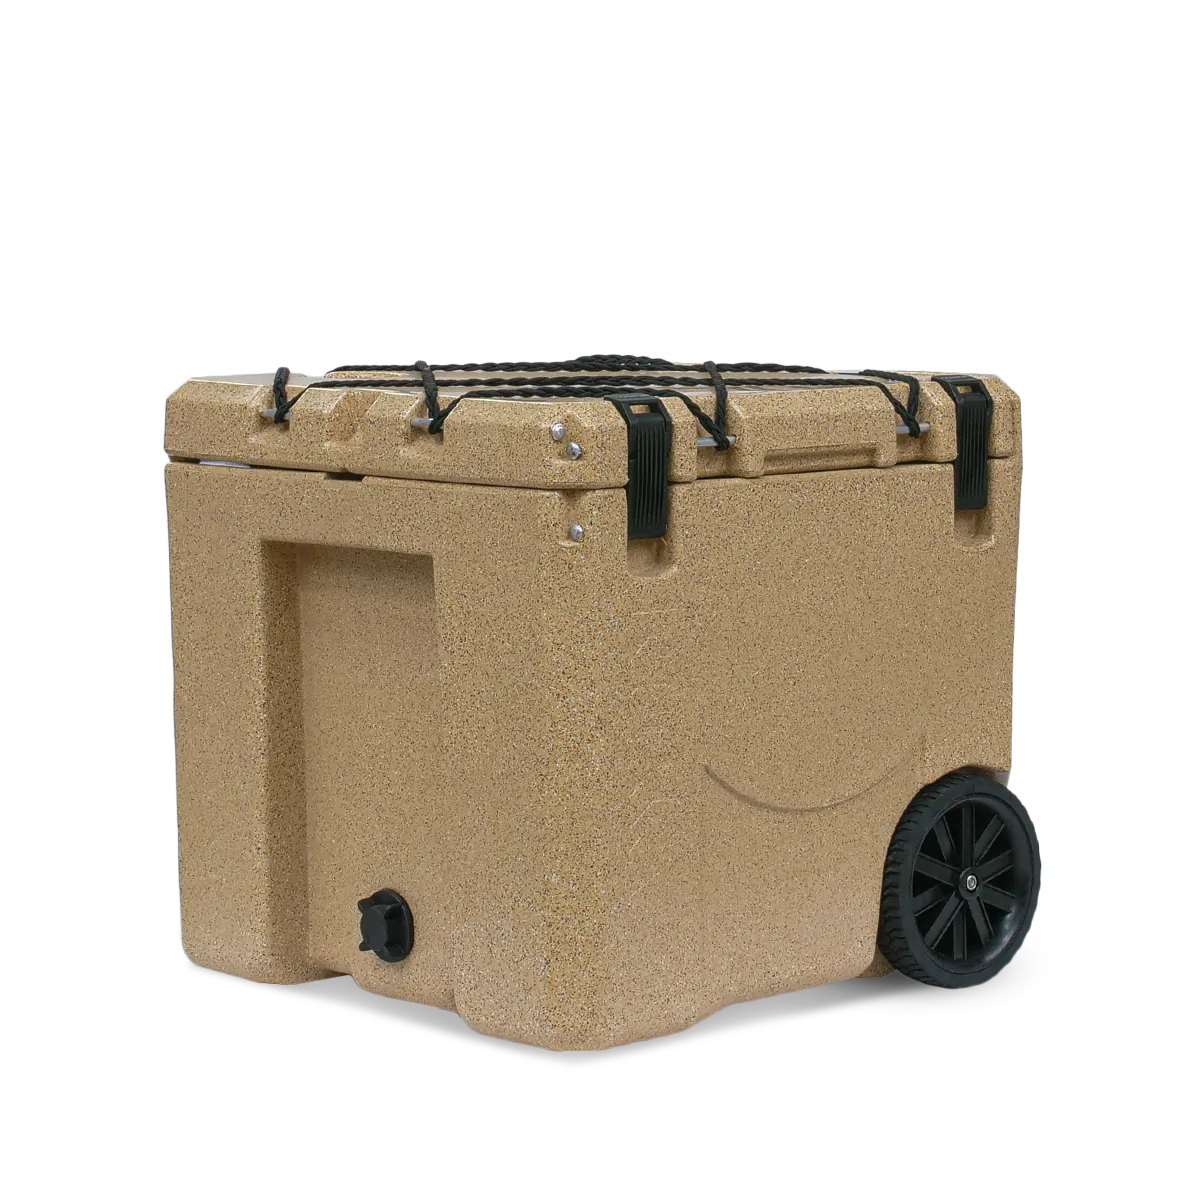 Featuring the Mule 30 Cooler cooler manufactured by Canyon shown here from a second angle.